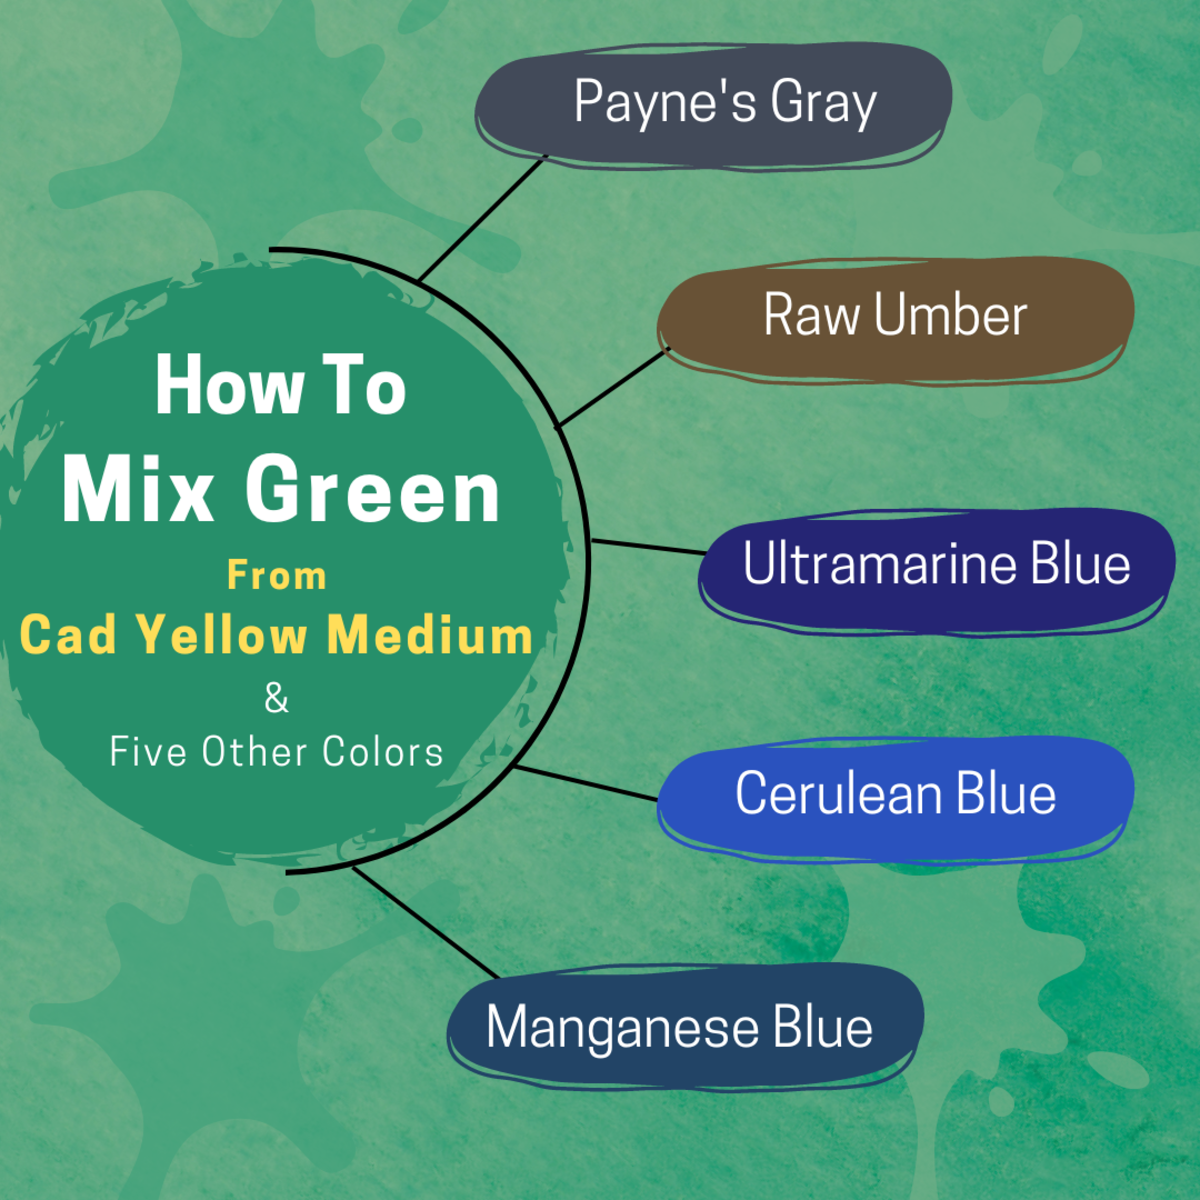 How to Mix Green From Cadmium Yellow Medium With Acrylics